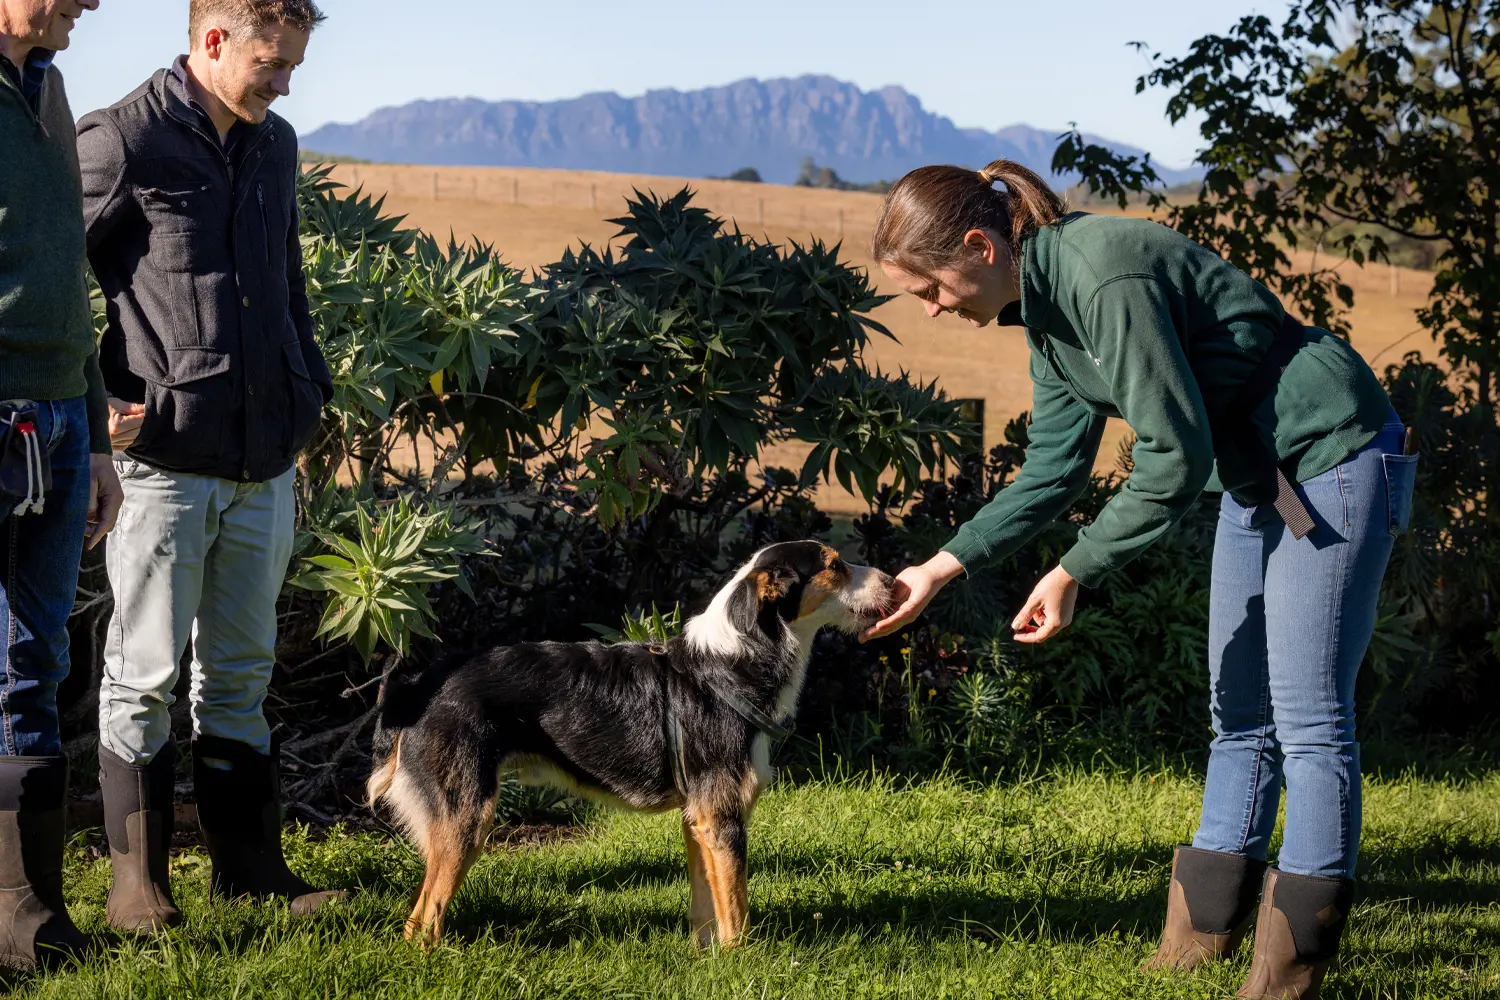 A woman stands in green grass in a garden and feeds a truffle hunting dog. Two men stand by and watch.